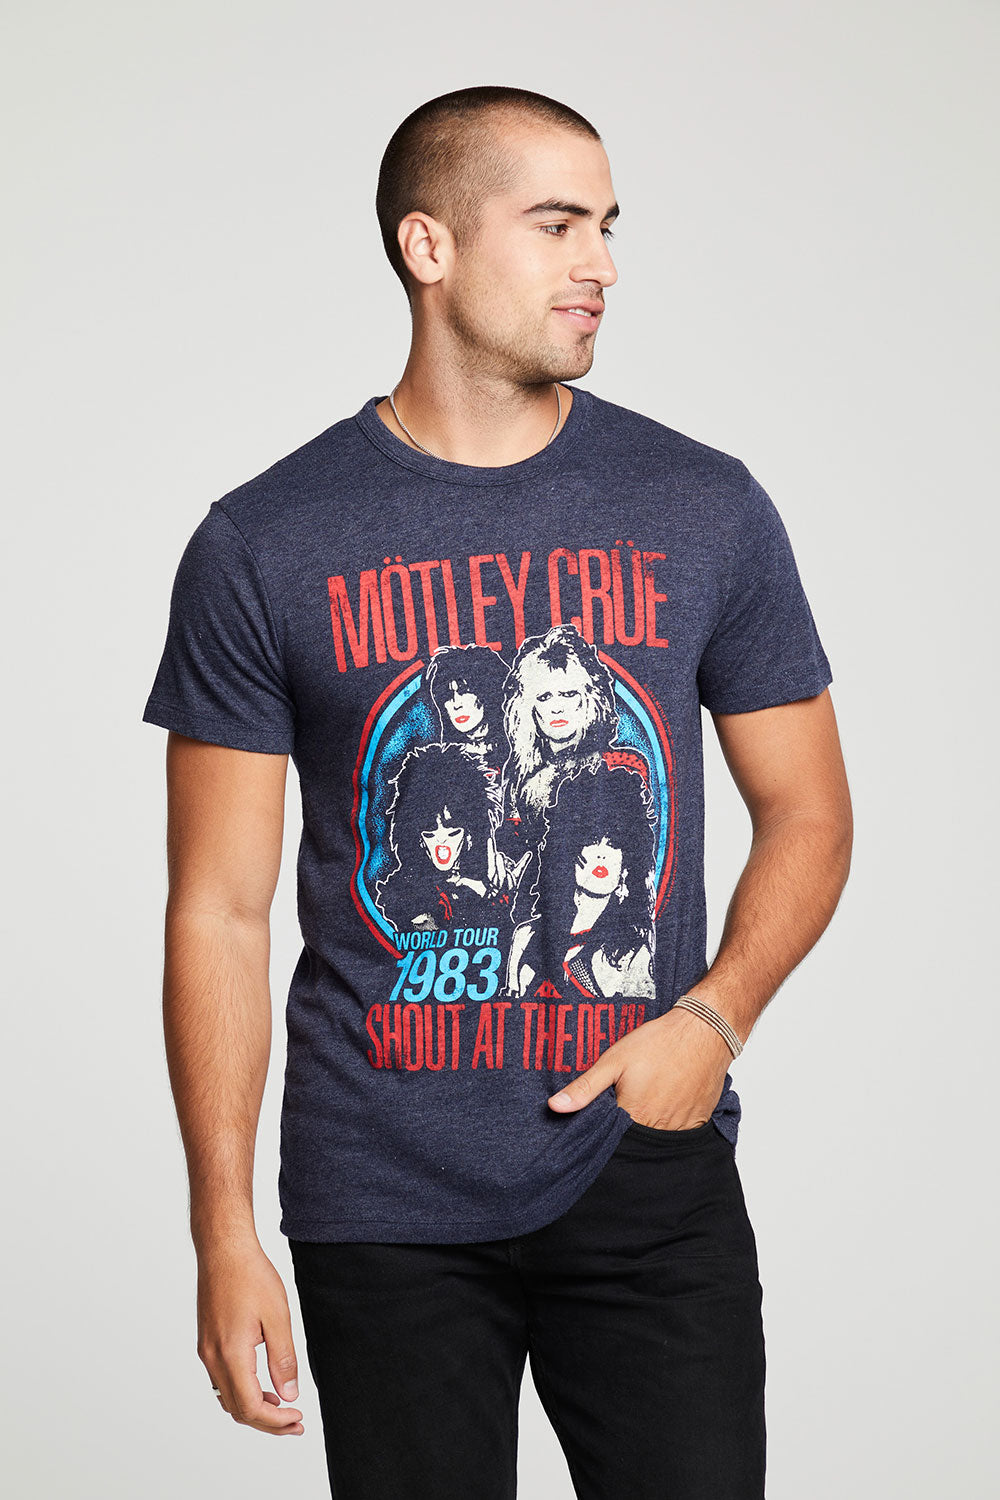 Motley Crue Shout At The Devil MENS chaserbrand